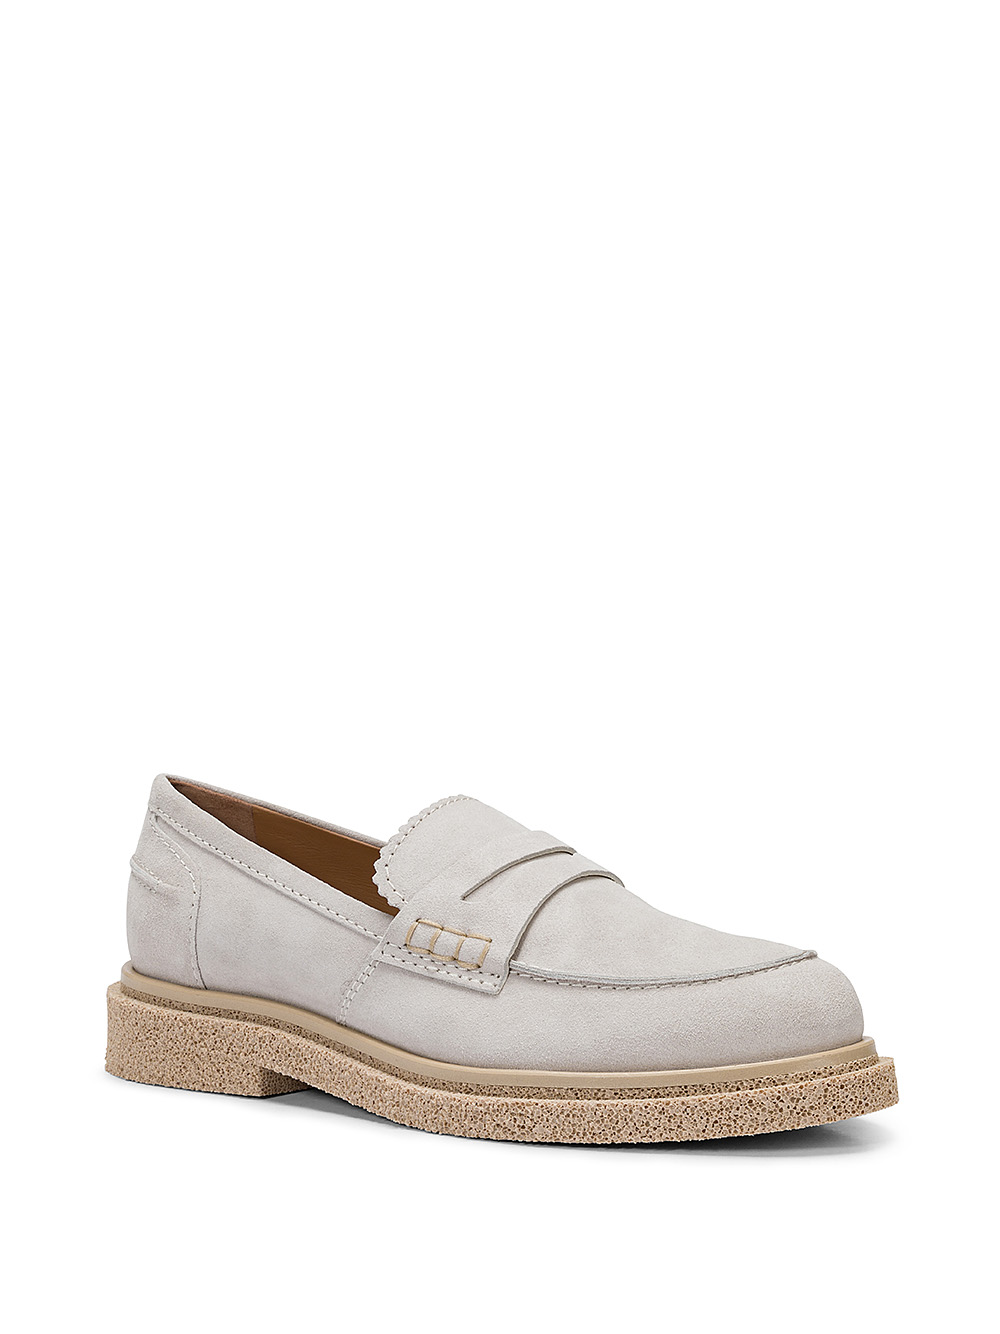 Kane suede leather moccasin